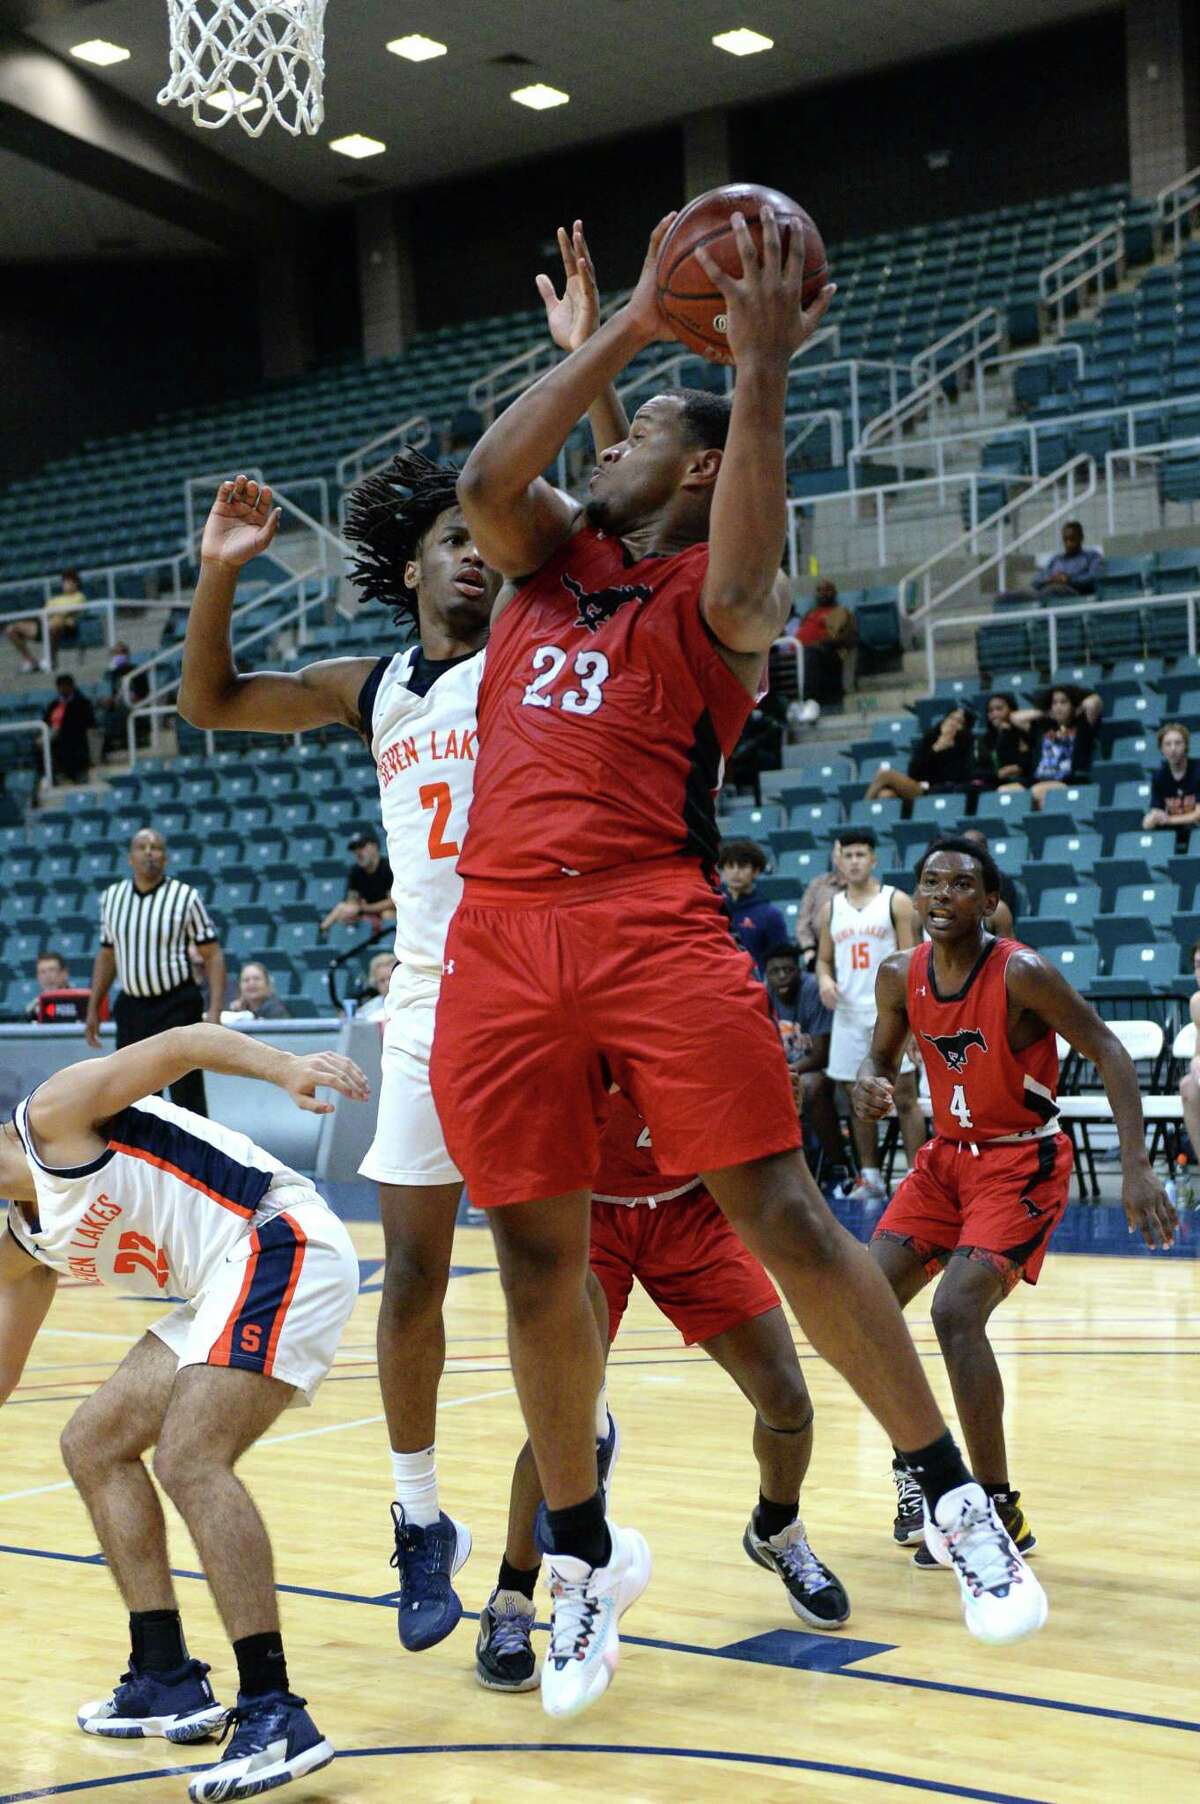 Willie Williams (23) of Westfield grabs a rebound during the second half of the Gold Bracket championship game between the Seven Lakes Spartans and the Westfield Mustangs in the Katy ISD Basketball Classic on Saturday, December 5, 2021 at the Leonard Merrill Center, Katy, TX.